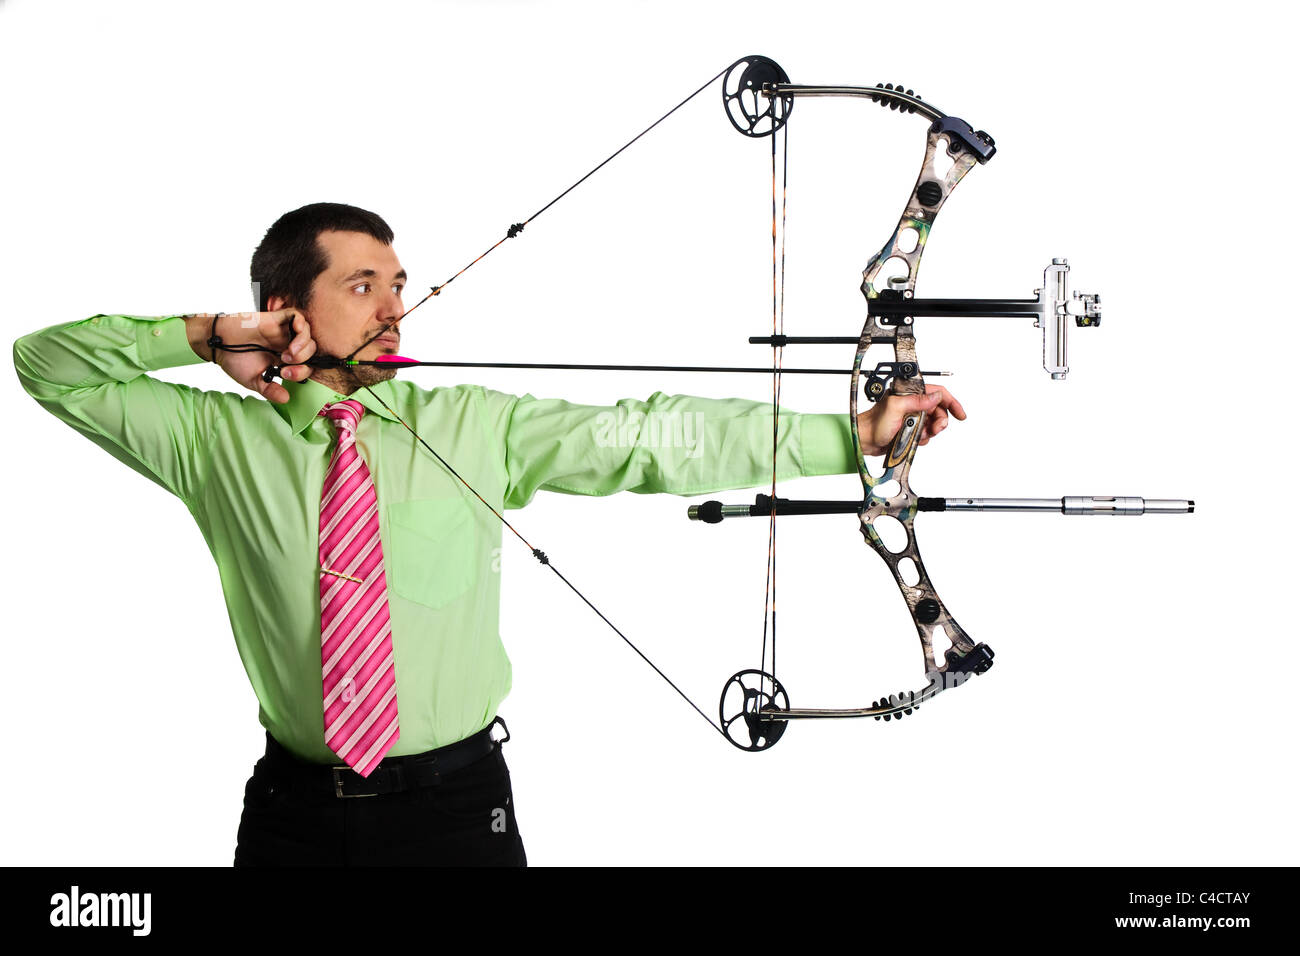 bow-hunter with a modern compound bow Stock Photo